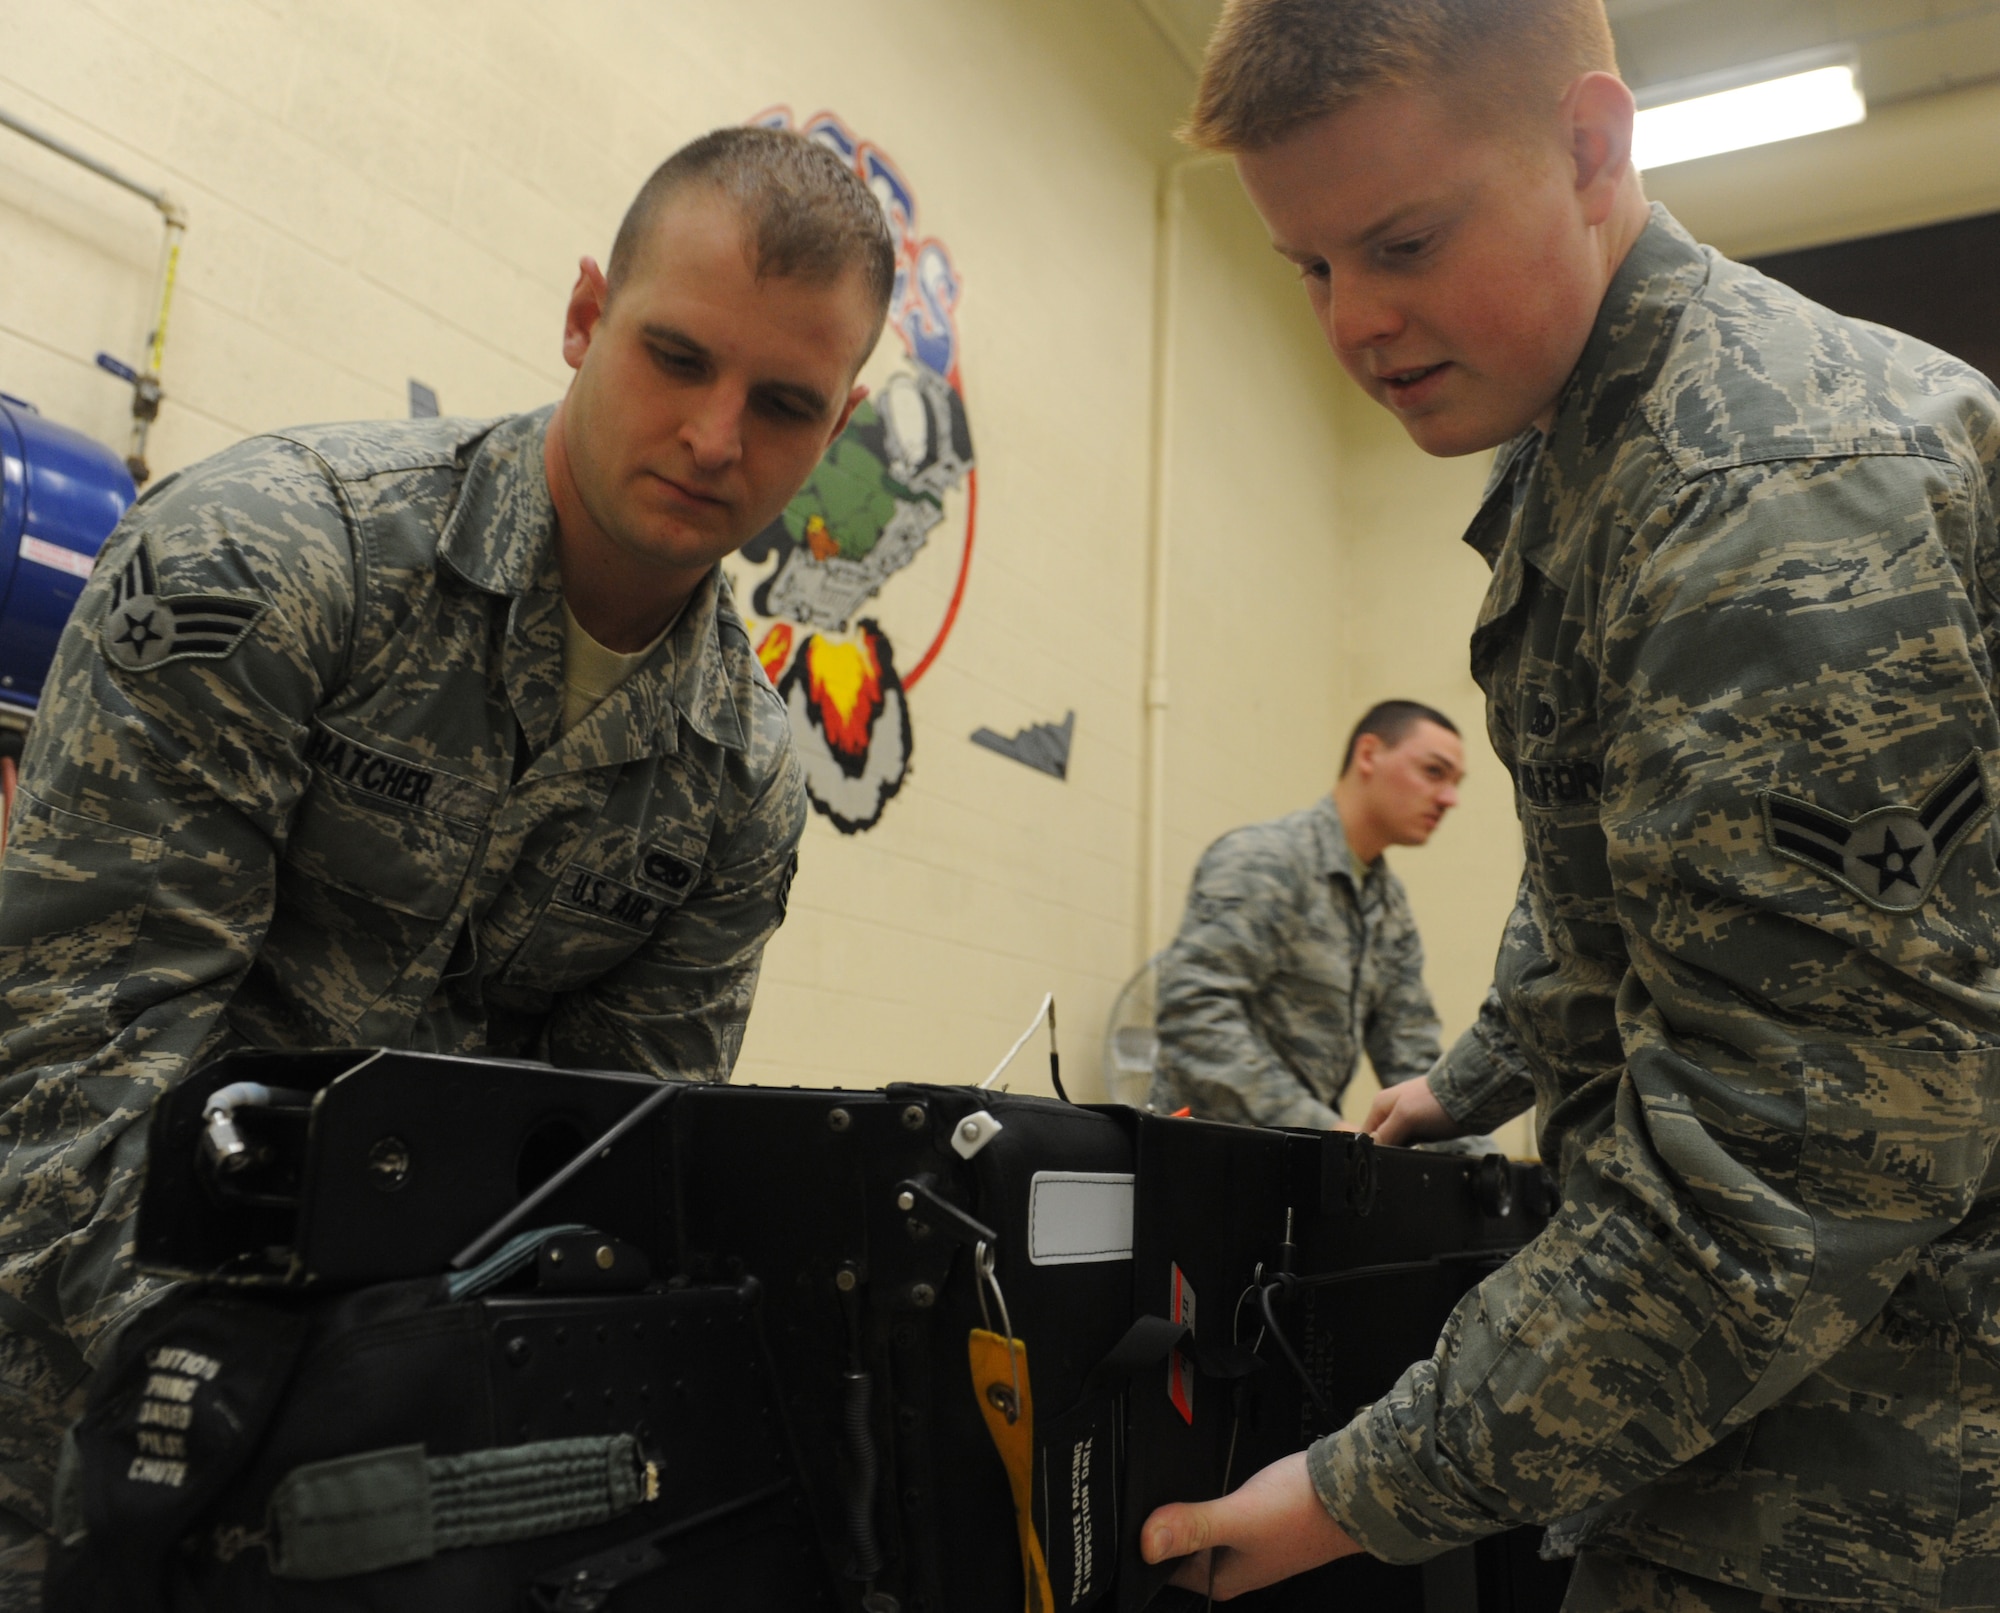 Senior Airman Patrick Hatcher and Airman 1st Class Christopher Amsel, 509th Maintenance Squadron egress systems journeymen, inspect a training ejection seat at Whiteman Air Force Base, Mo., March 19, 2013. The egress shop works on all ejection seats for Whiteman’s B-2 Spirit and T-38 Talon aircraft. (U.S. Air Force photo by Airman 1st Class Bryan Crane/Released)